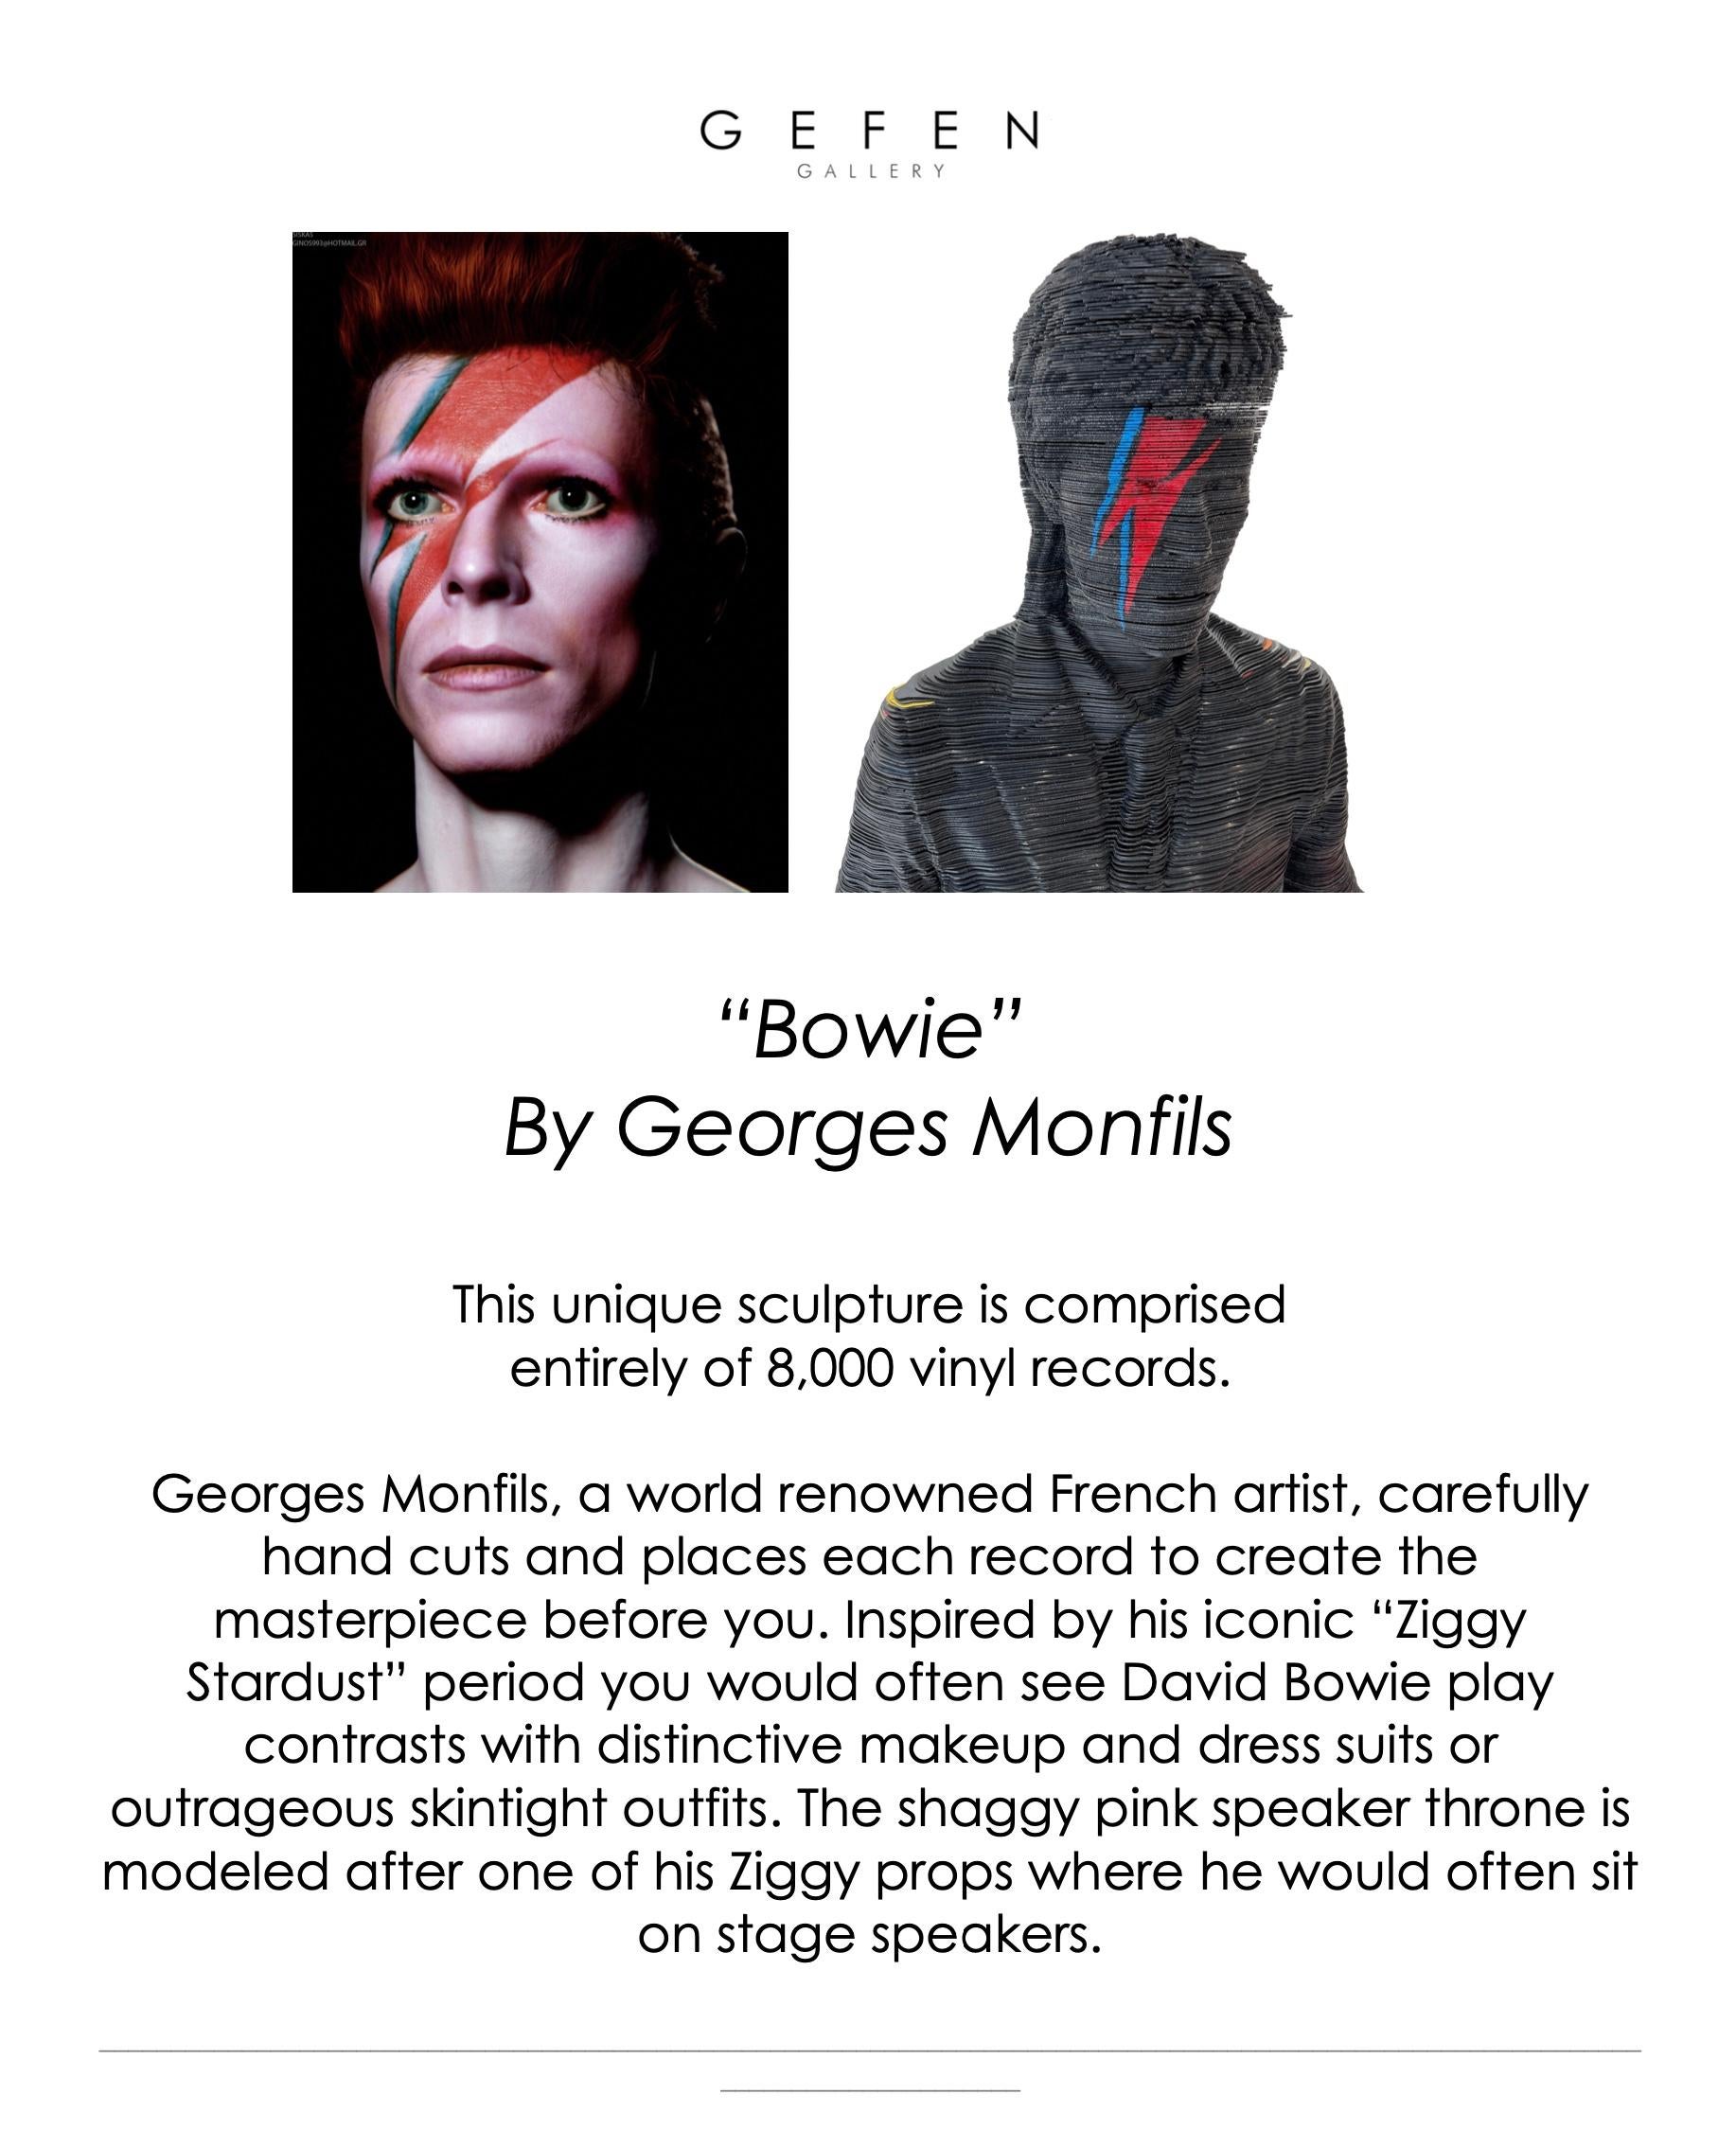 David Bowie is a unique sculpture created from Vinyl Records by Belgian artist Georges Monfils. 
David is made out of around 8000 vintage vinyl records.
He’s sitting on a a throne of PA speakers, with the classic Ziggy Stardust lightning bolt across